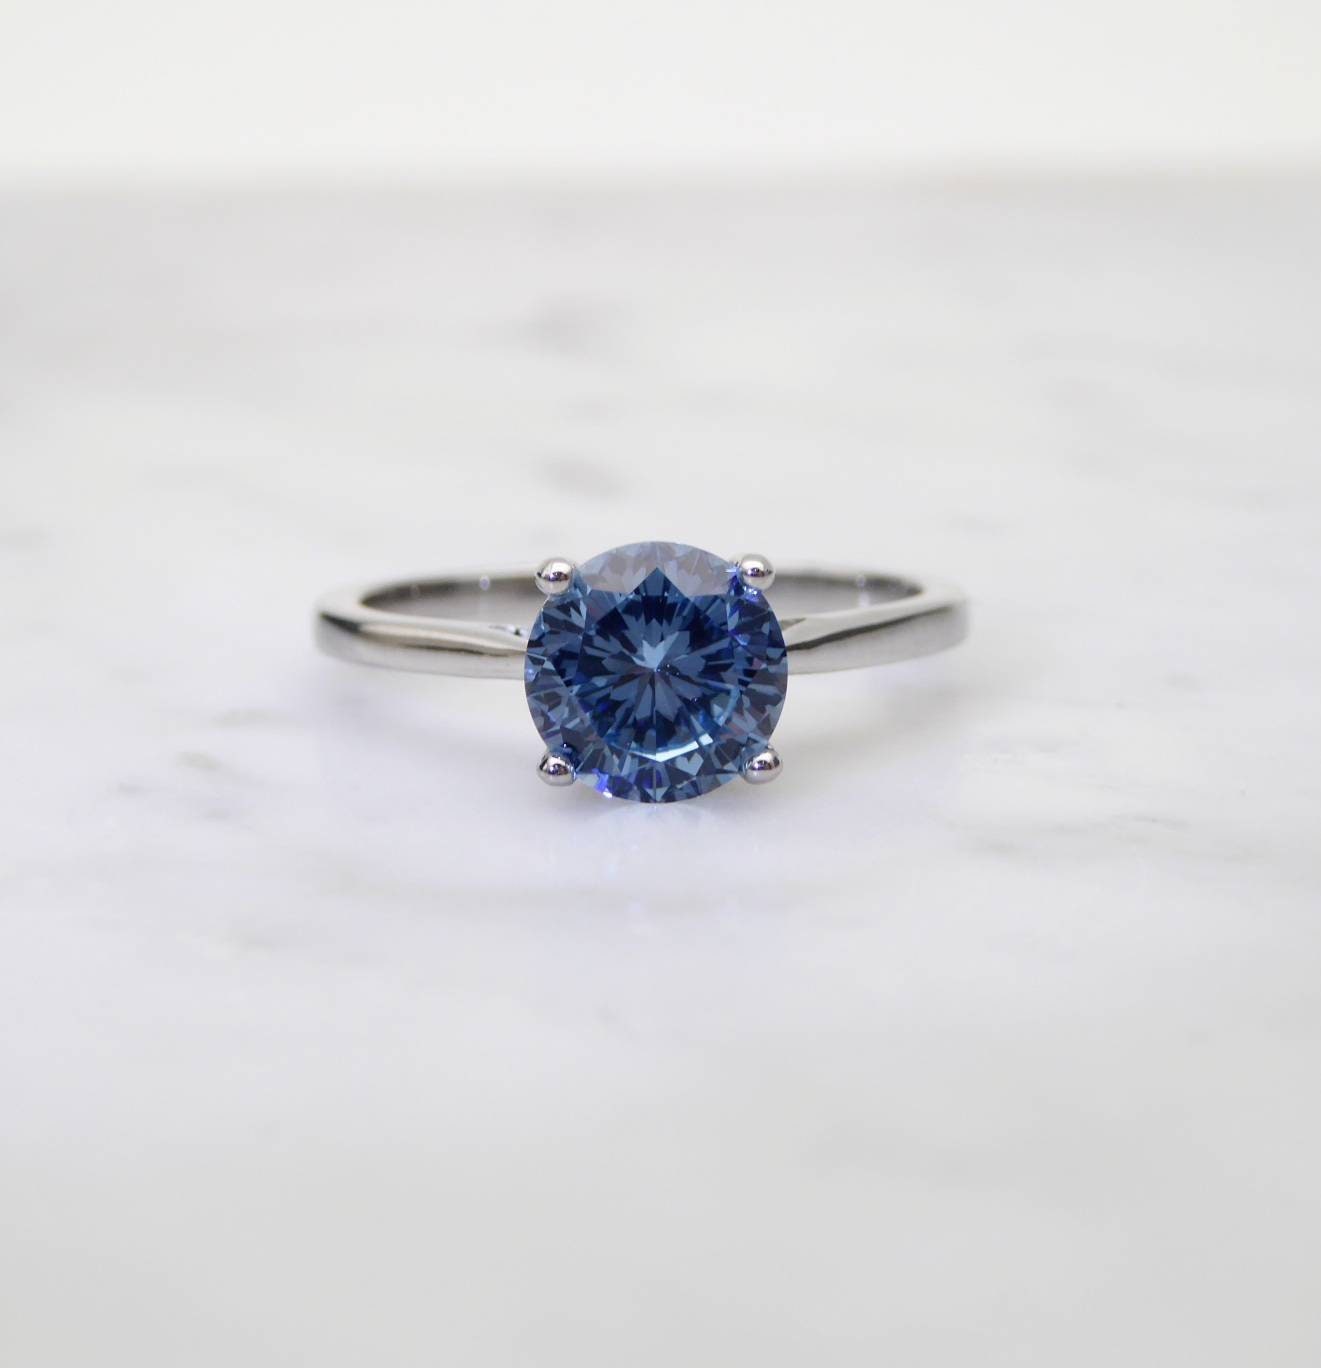 Natural 1.5ct Blue Topaz solitaire ring in Titanium or White Gold - engagement ring - wedding ring - handmade ring